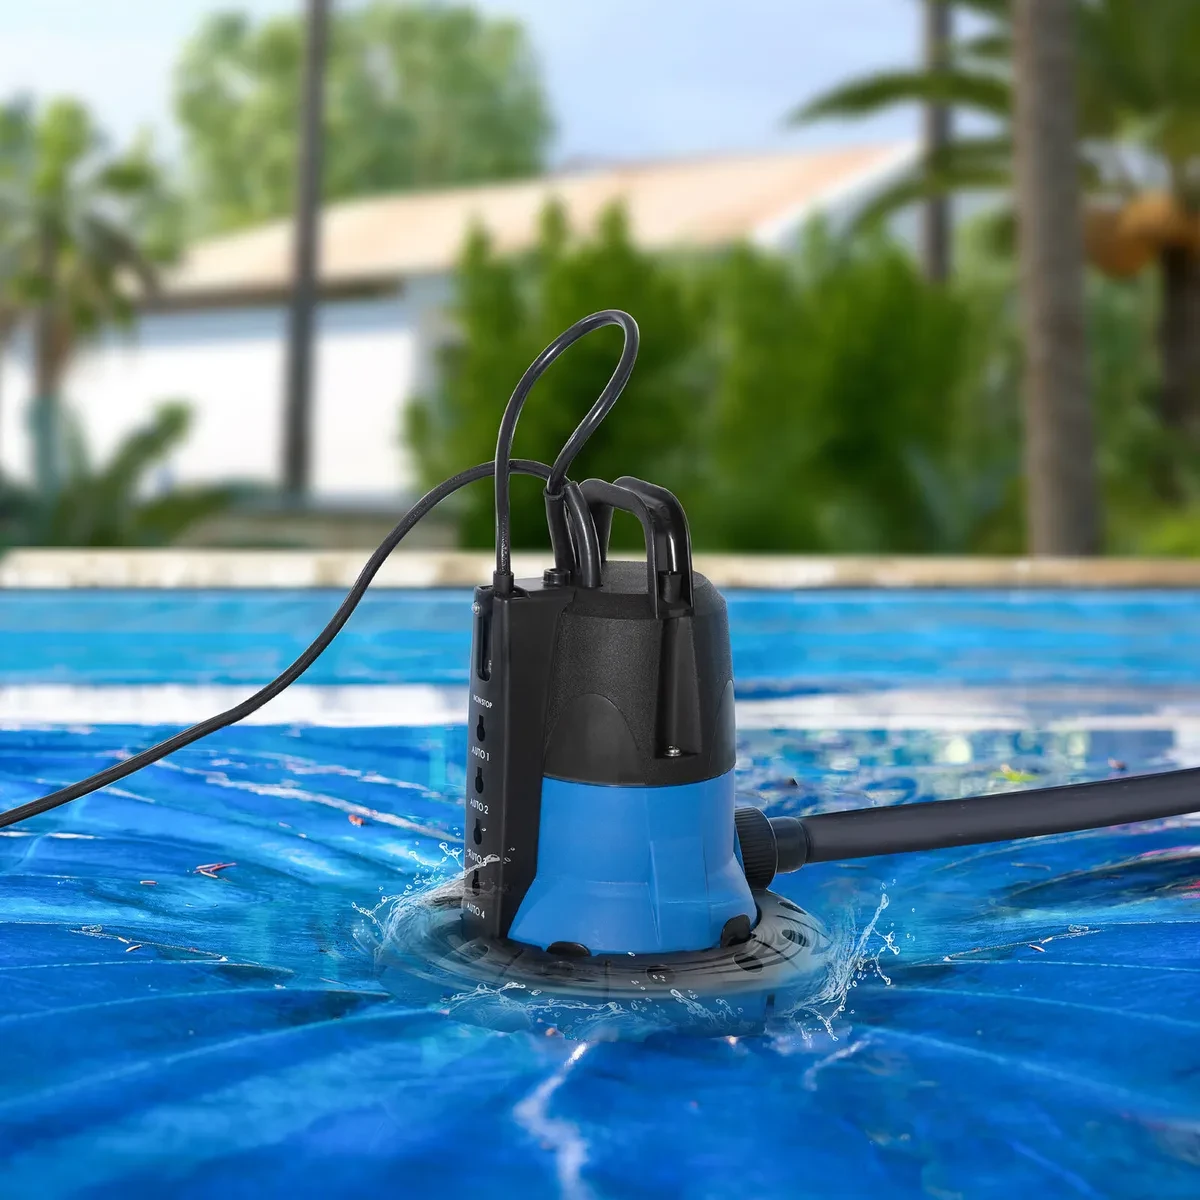 A Submersible Pump in a pool